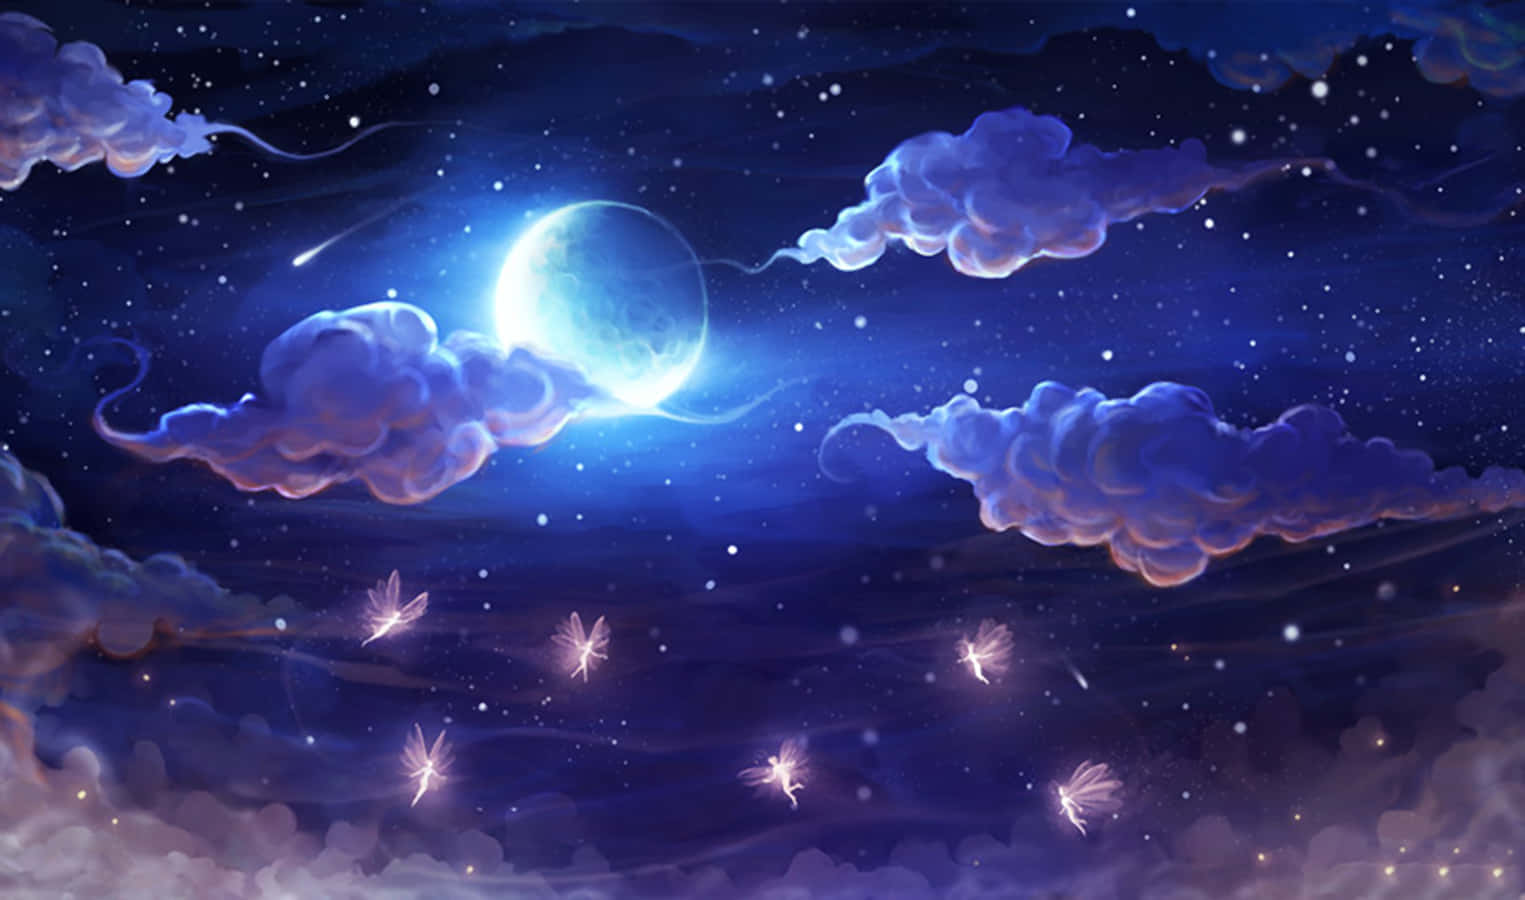 Magical Night Sky With Many Glowing Fairies